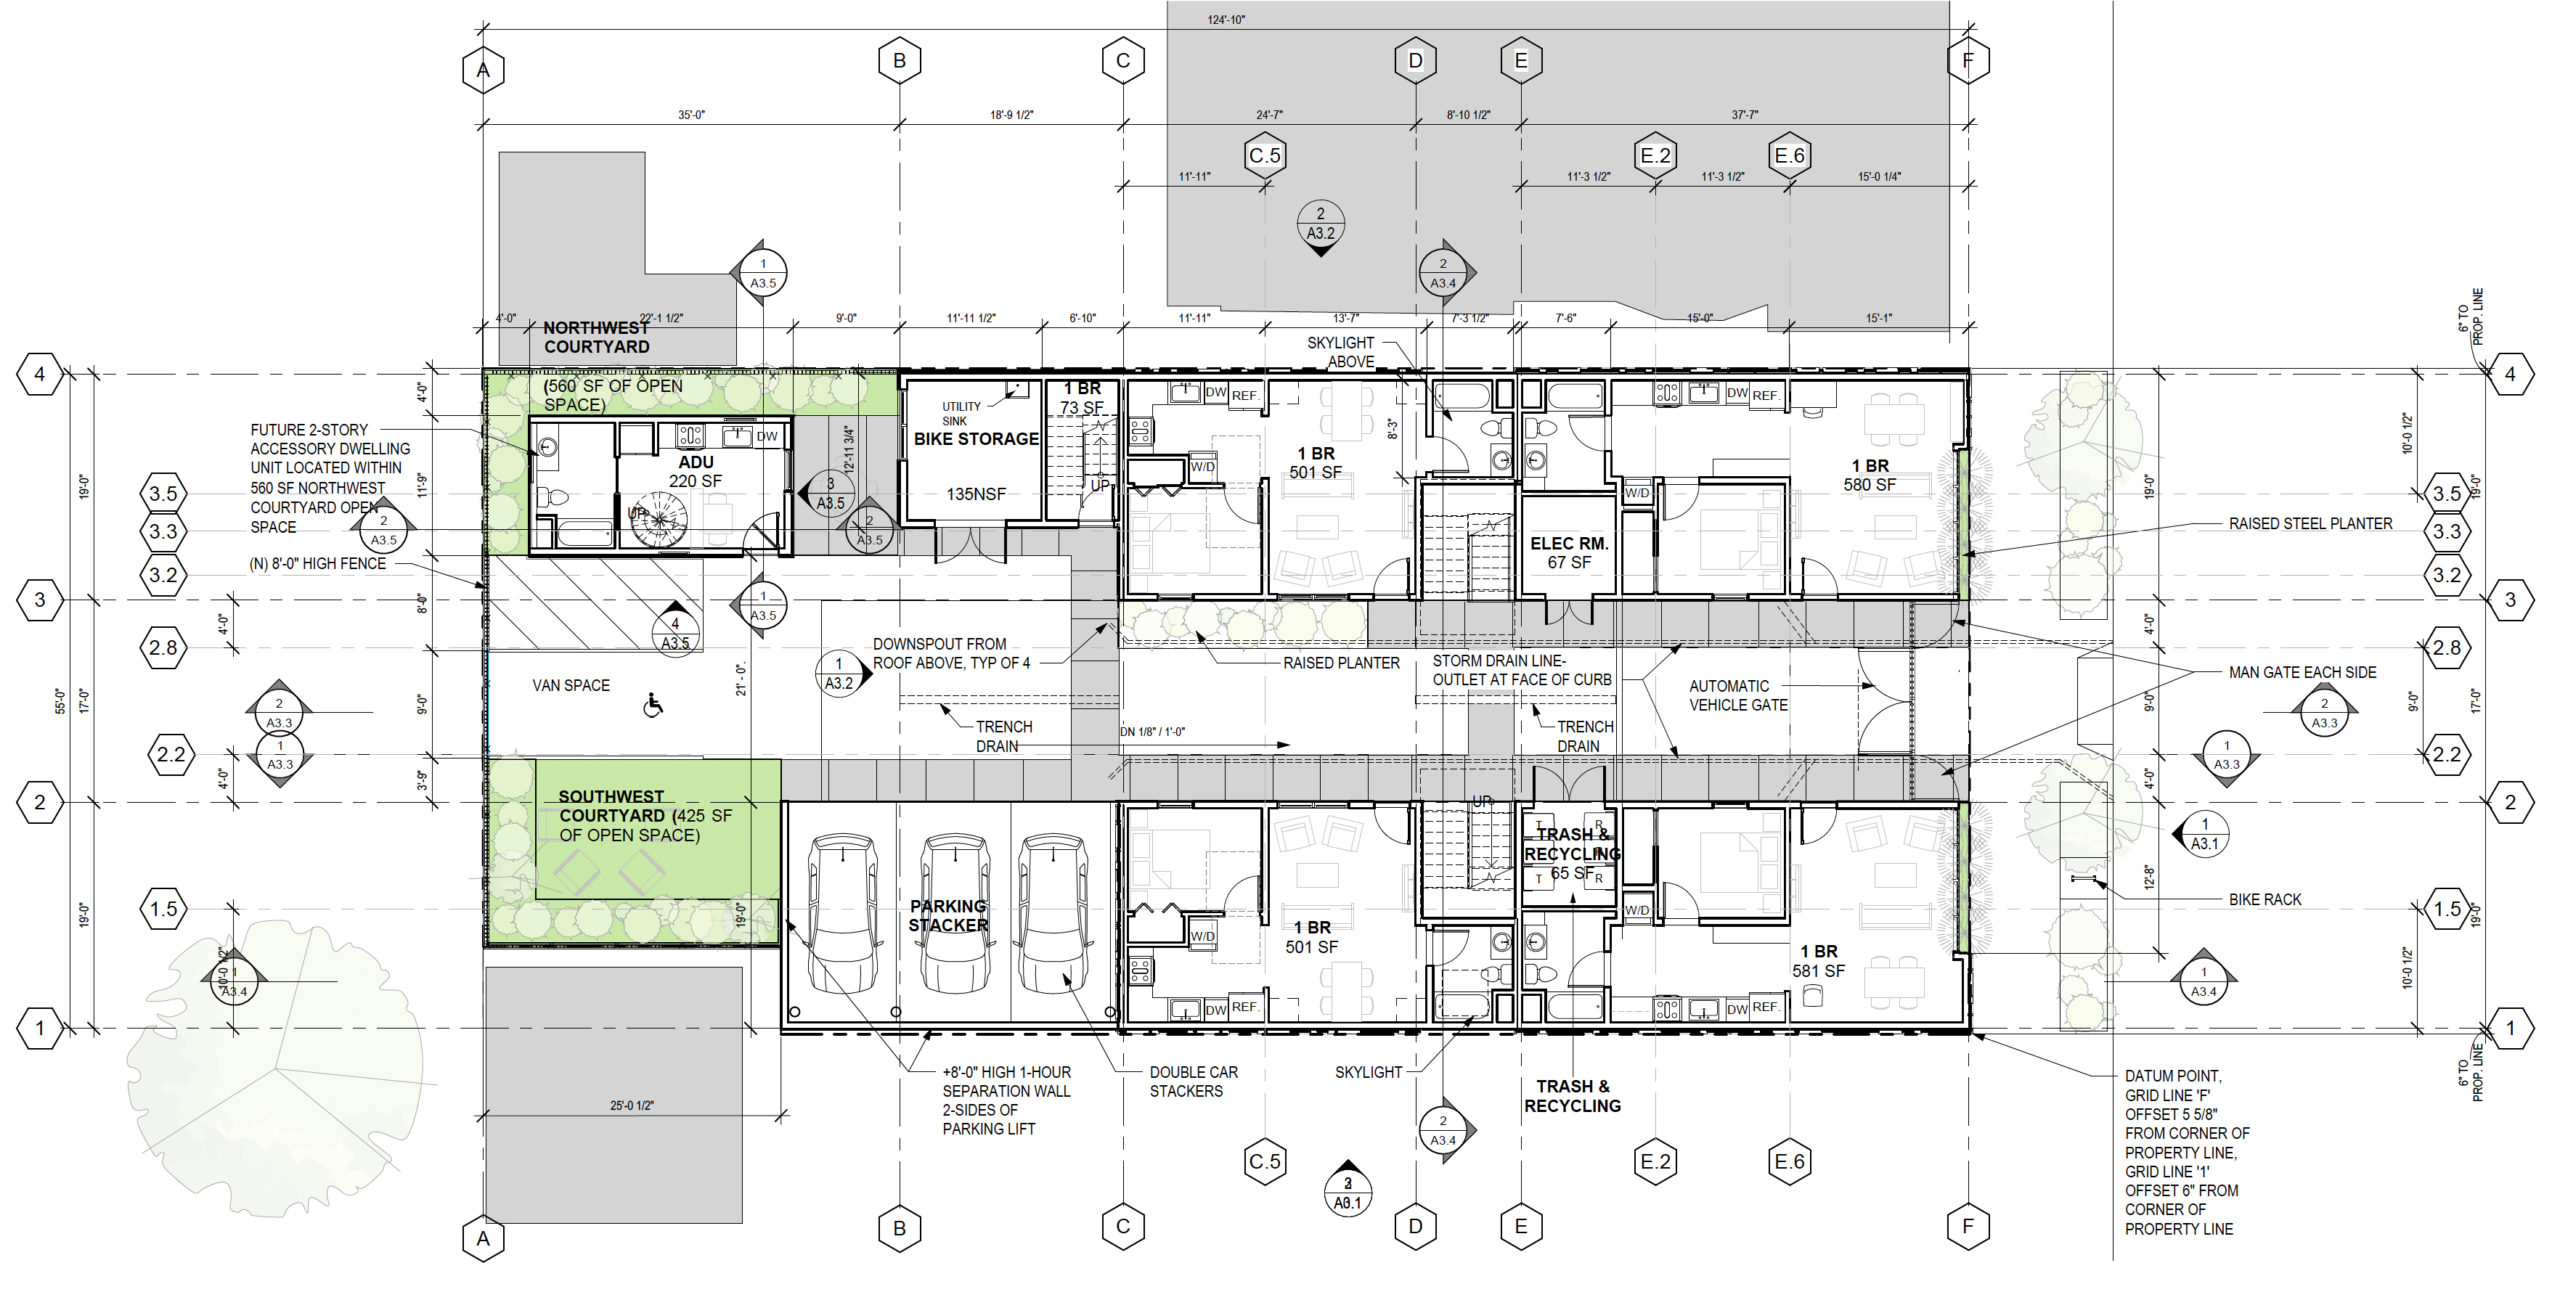 4127 Martin Luther King Jr. Way ground-level floor plan, rendering by Kava Massih Architects